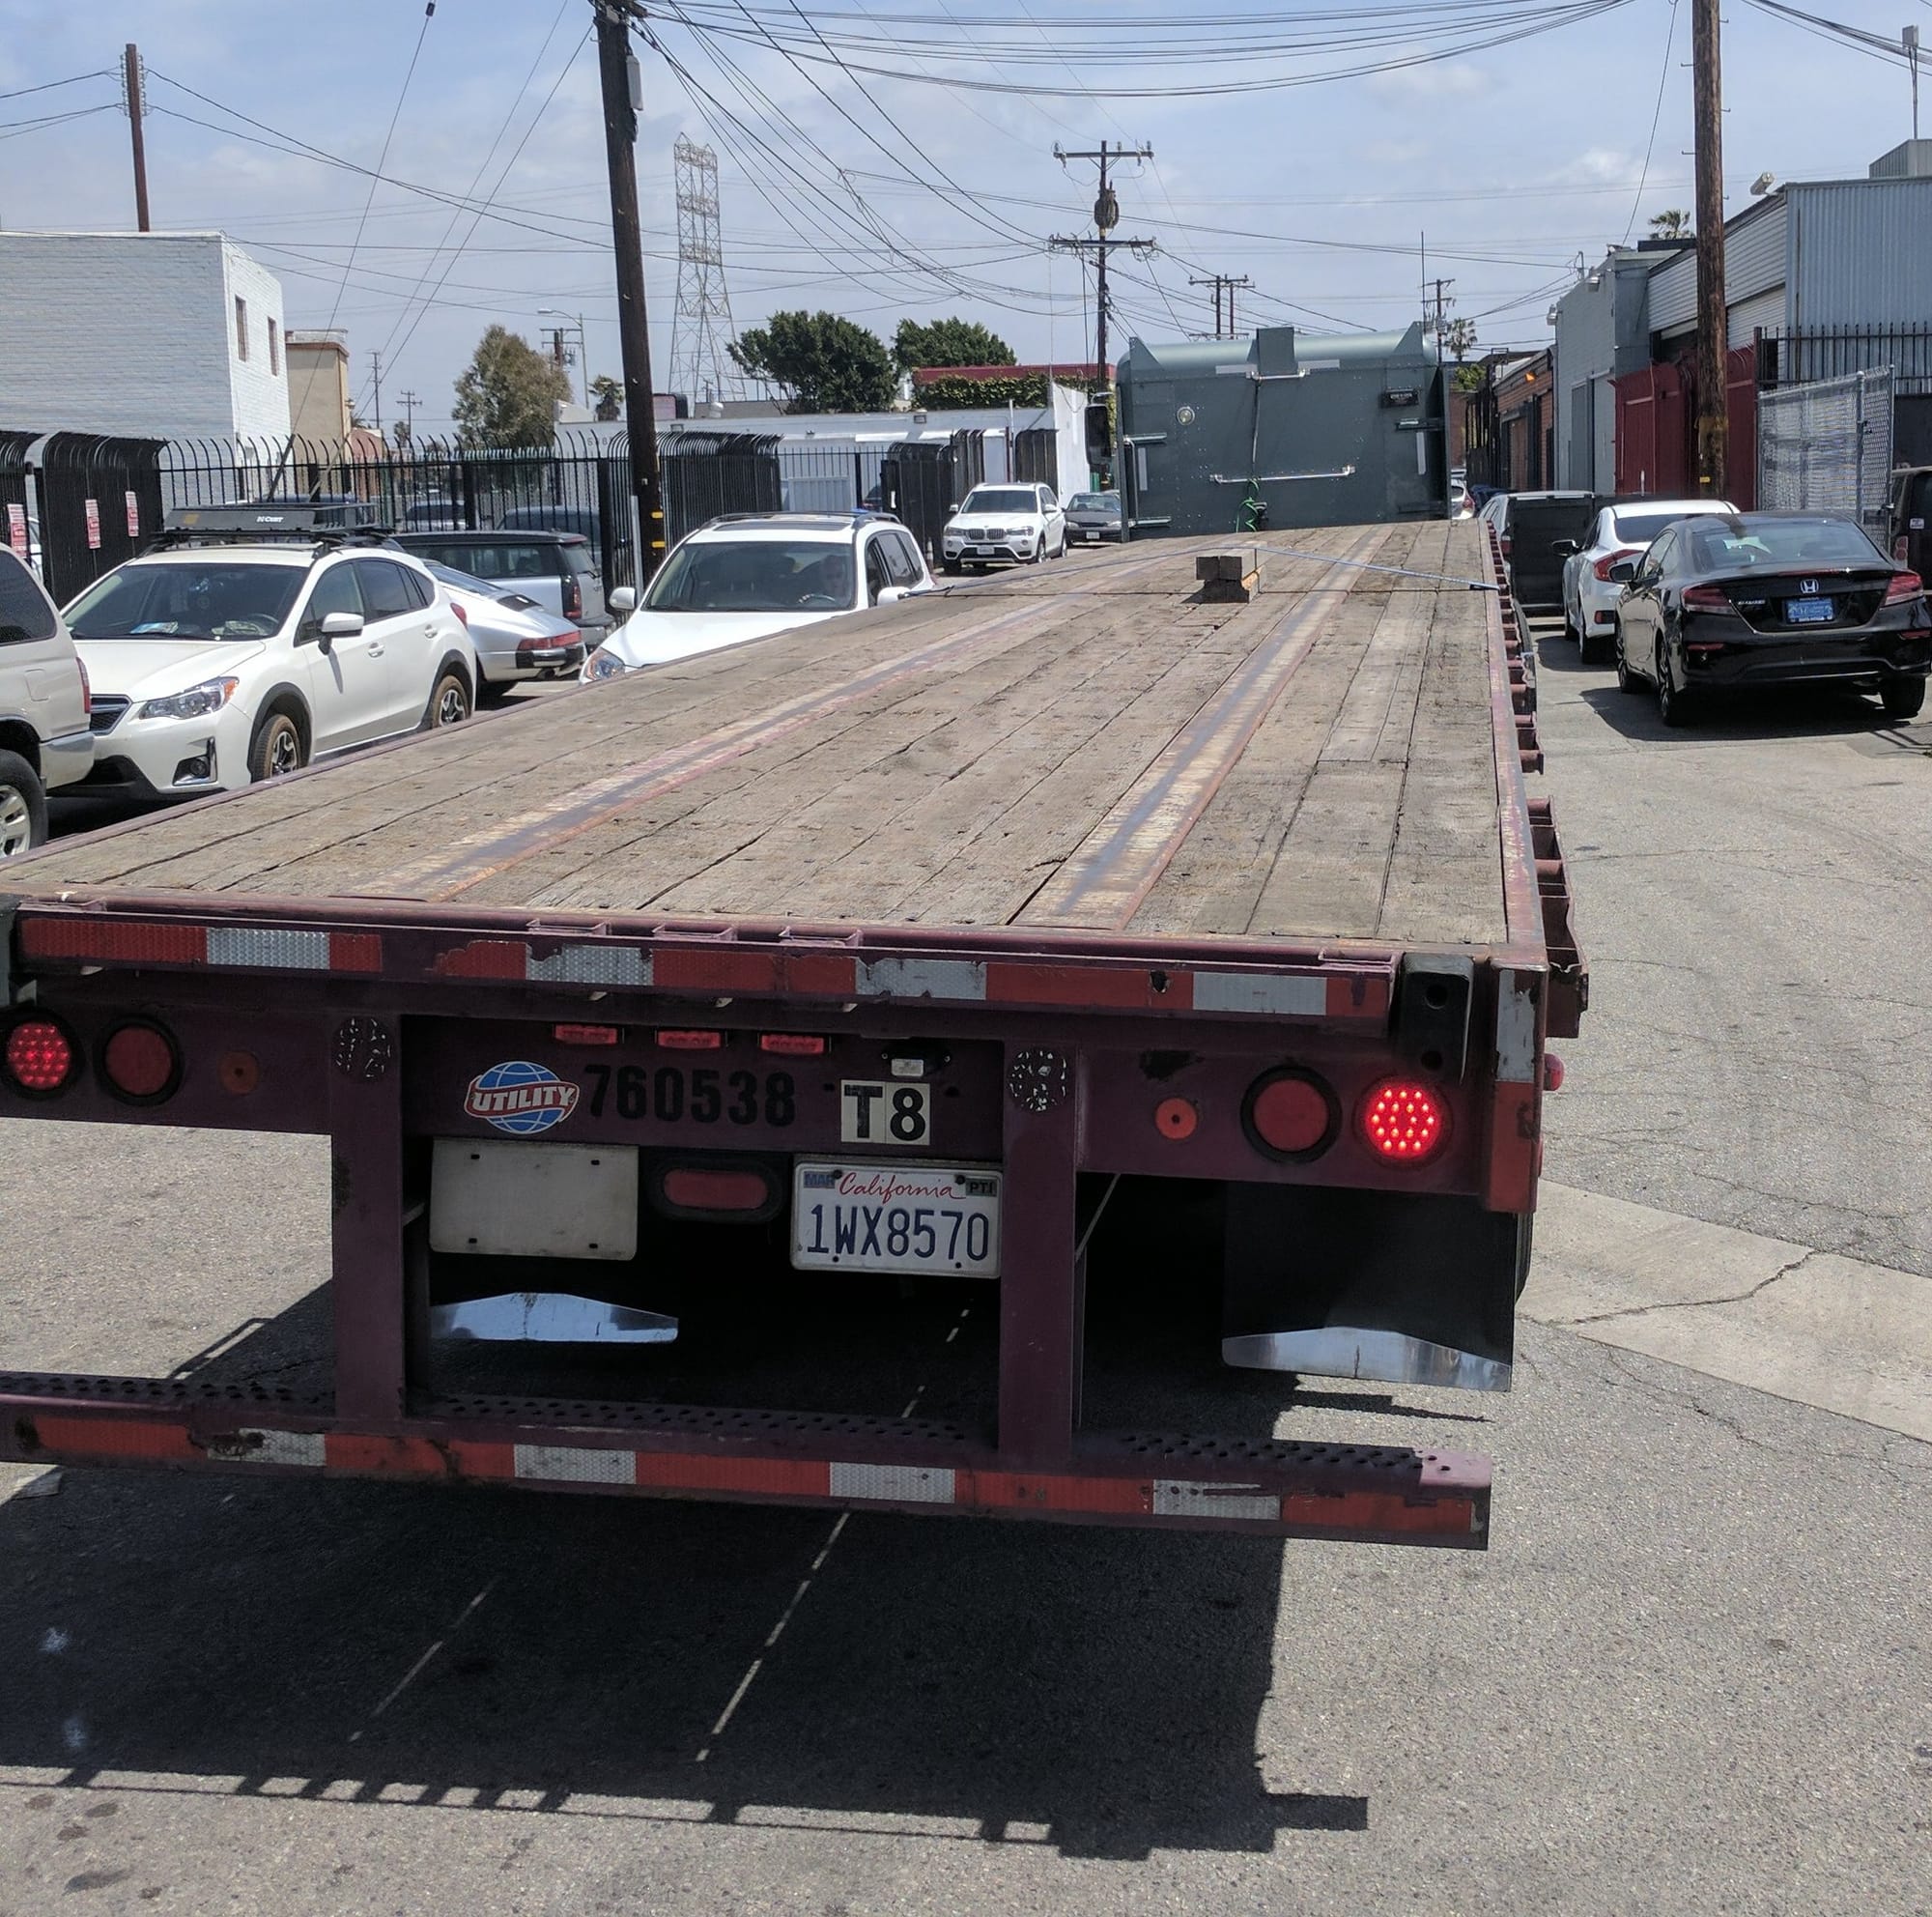 A few small pieces of wood tied down to a large flatbed truck.